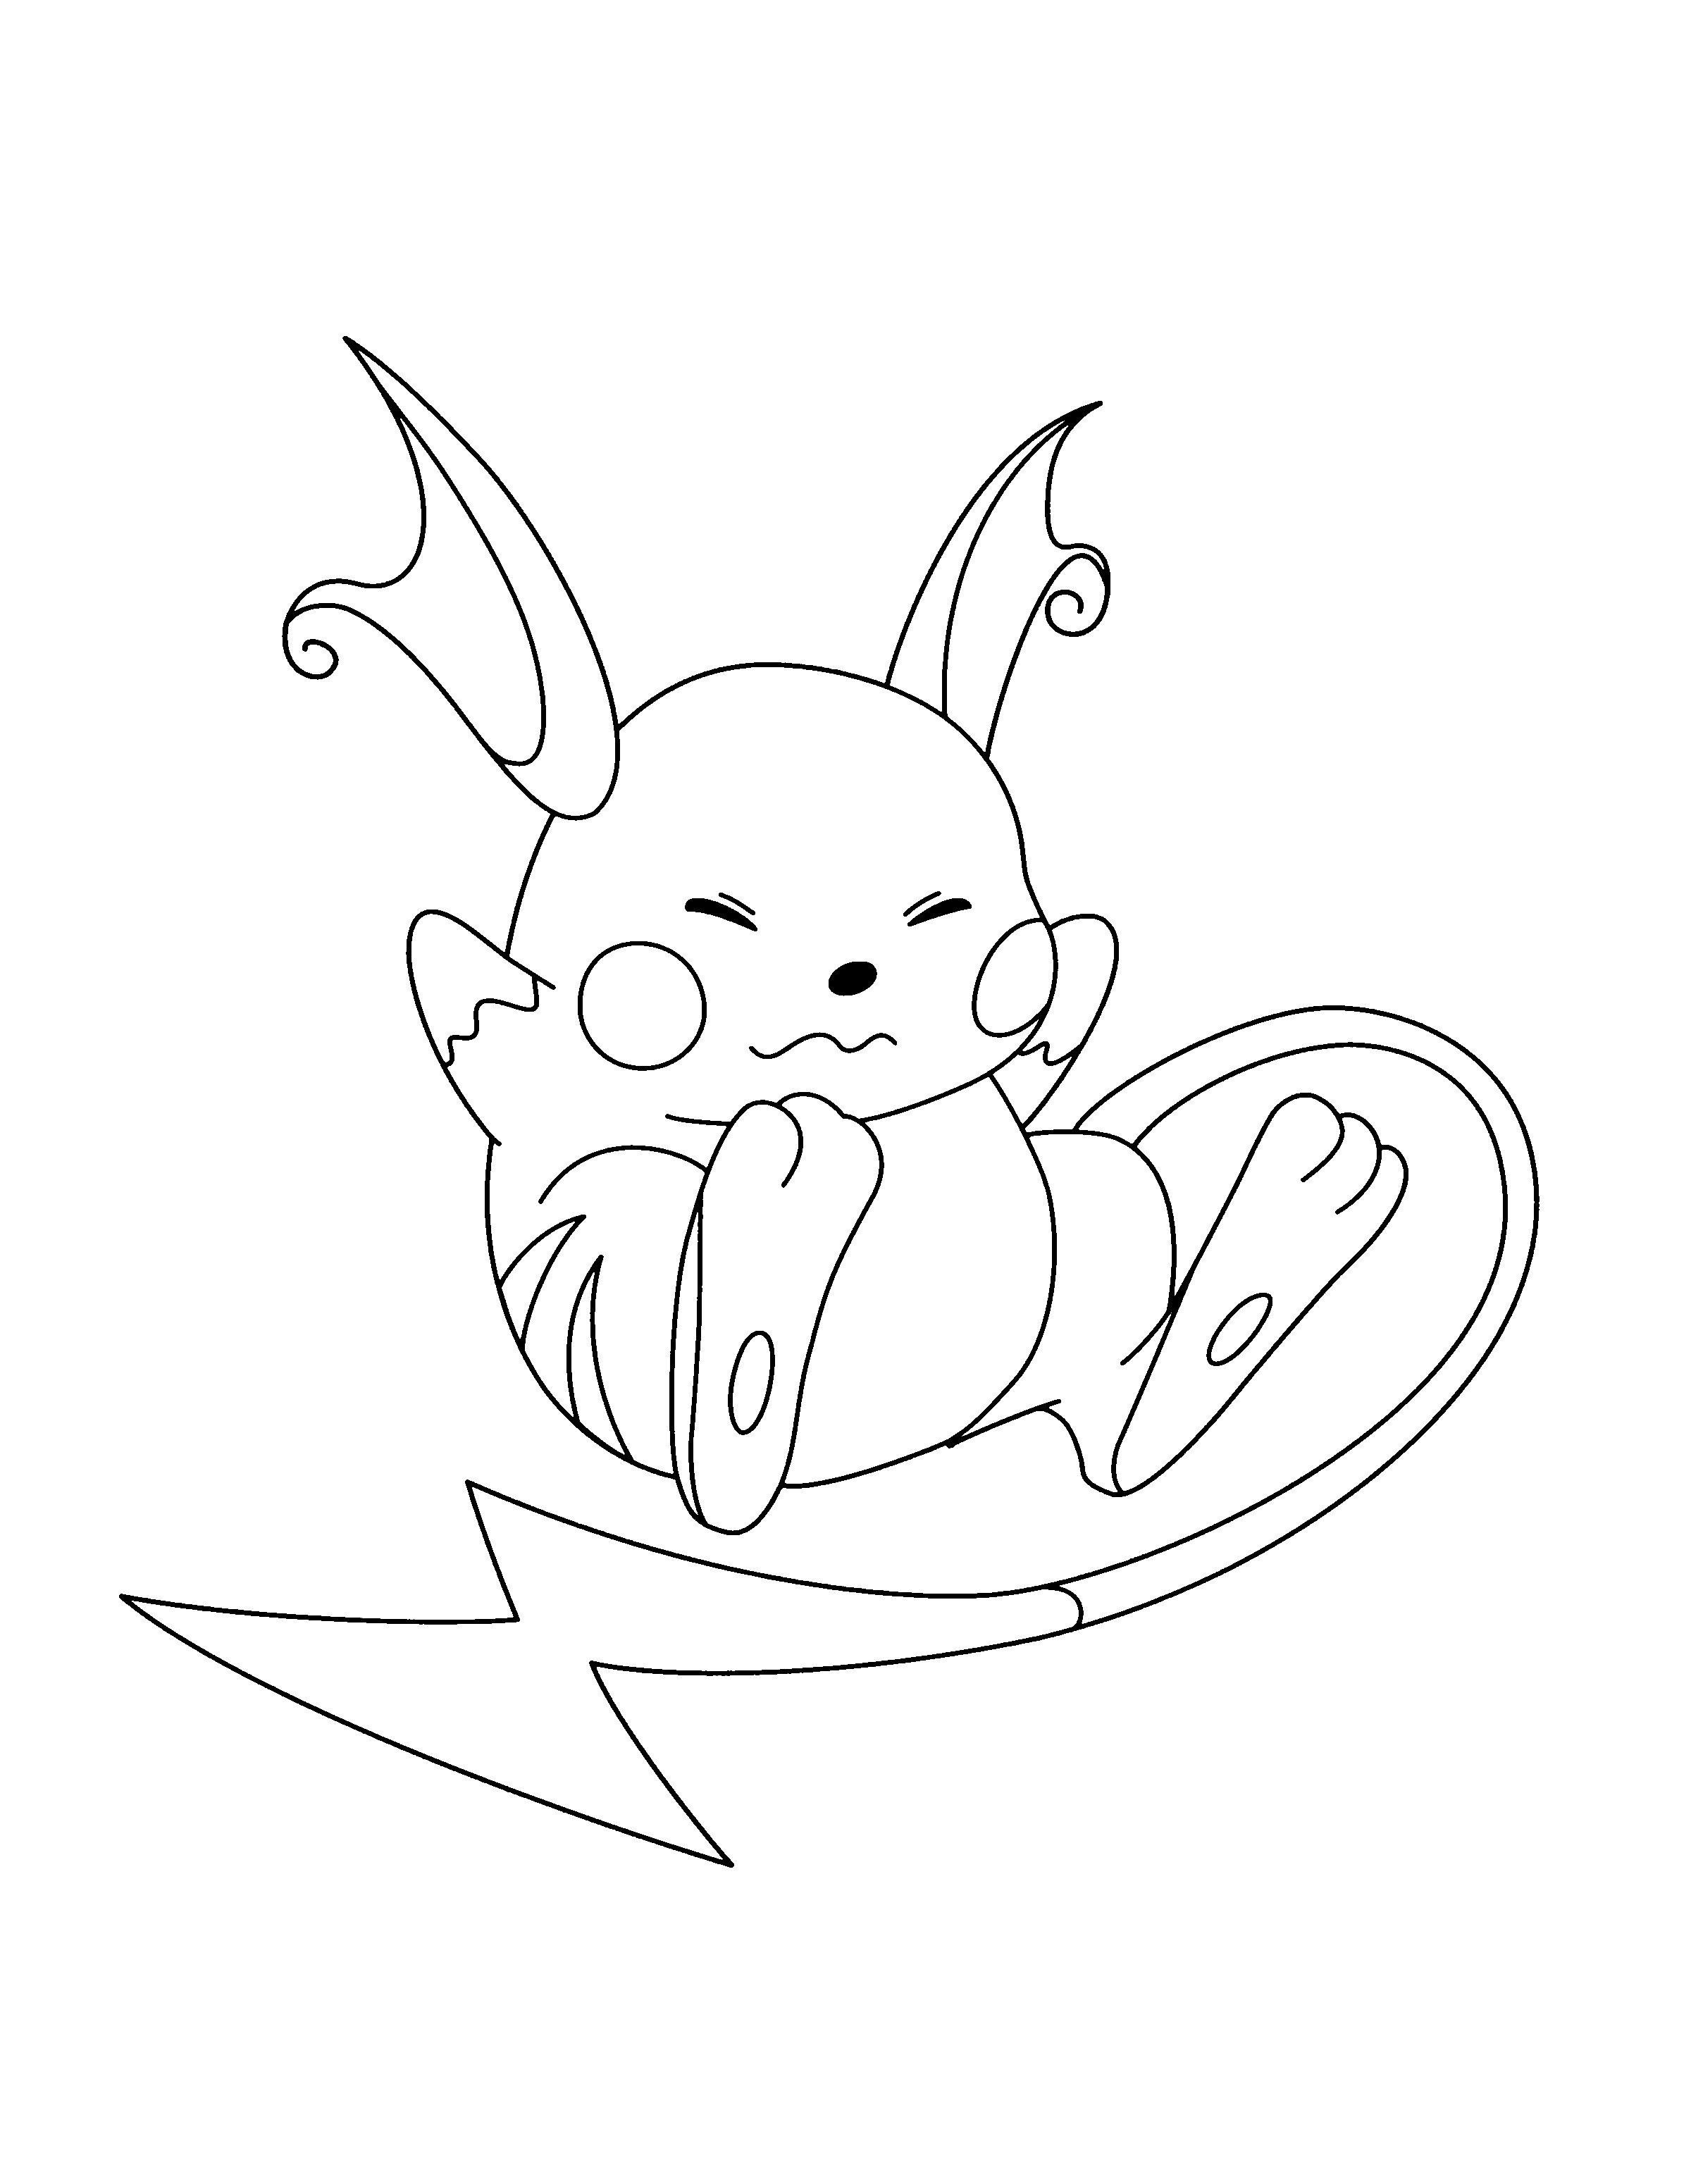 Raichu Pokemon Coloring Pages Pokemon Coloring Horse Coloring Pages